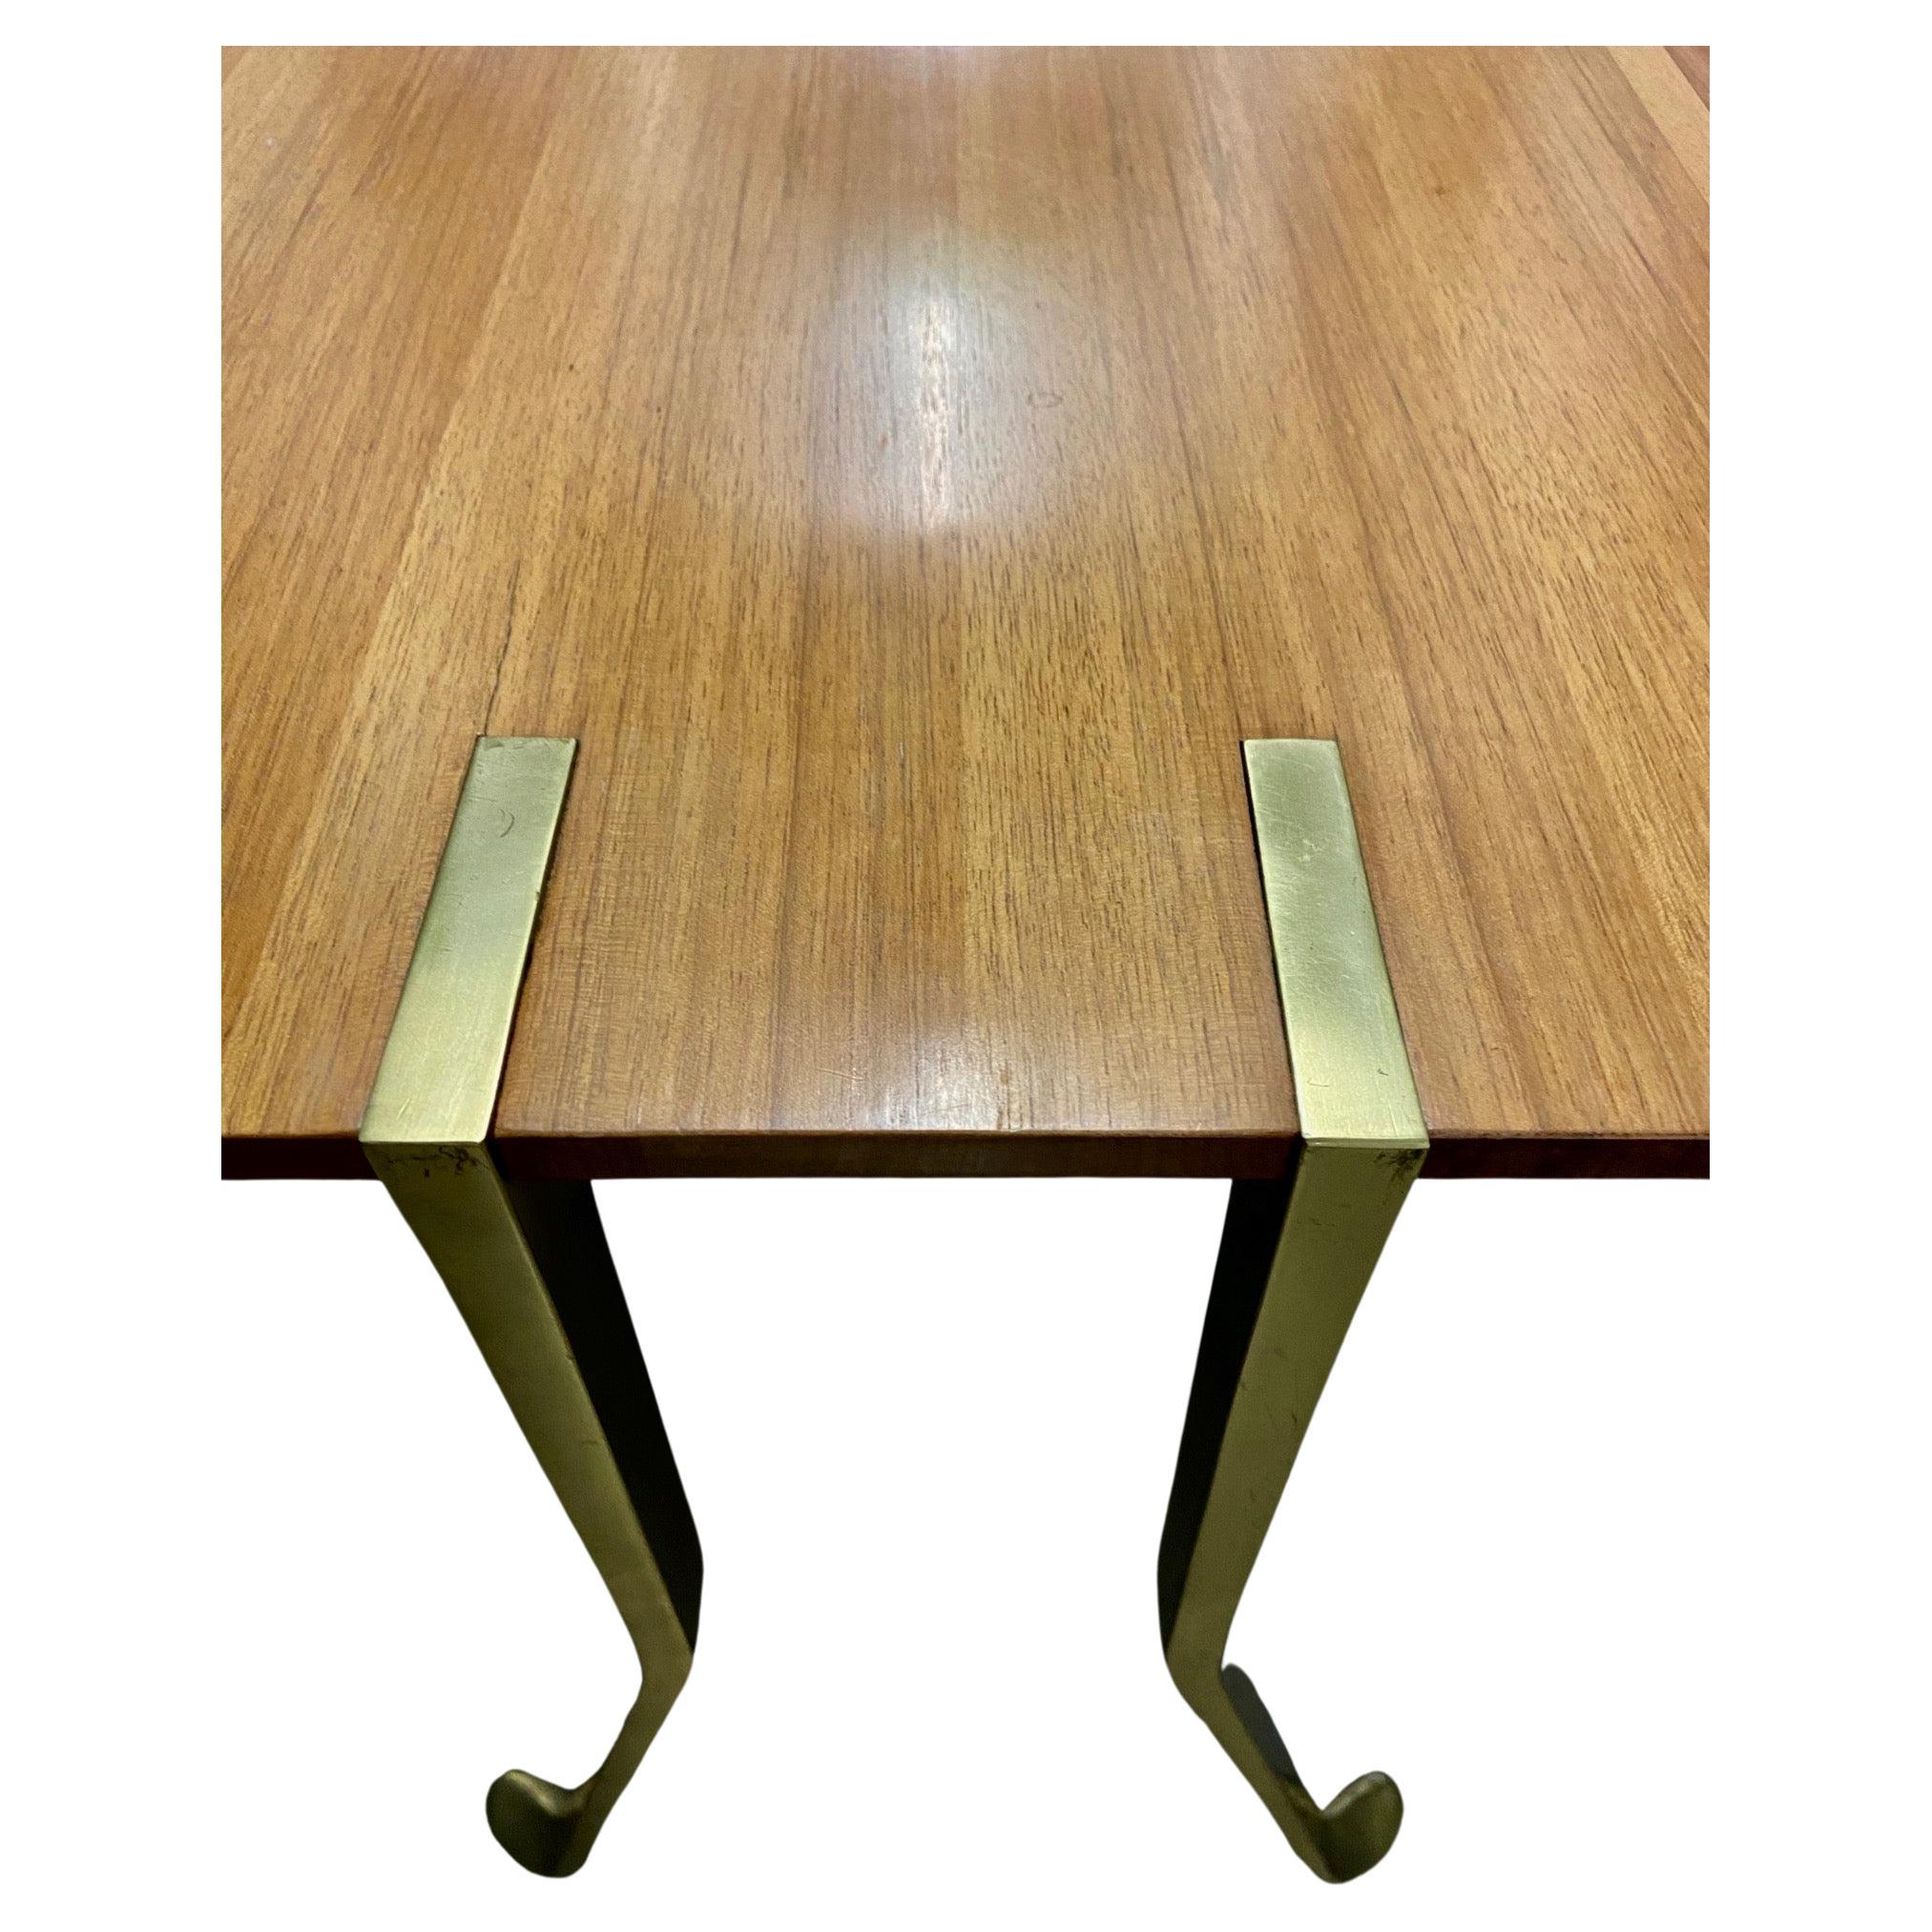 a very well designed and beautifully crafted wood and metal table. 
circa 1950's to 60's